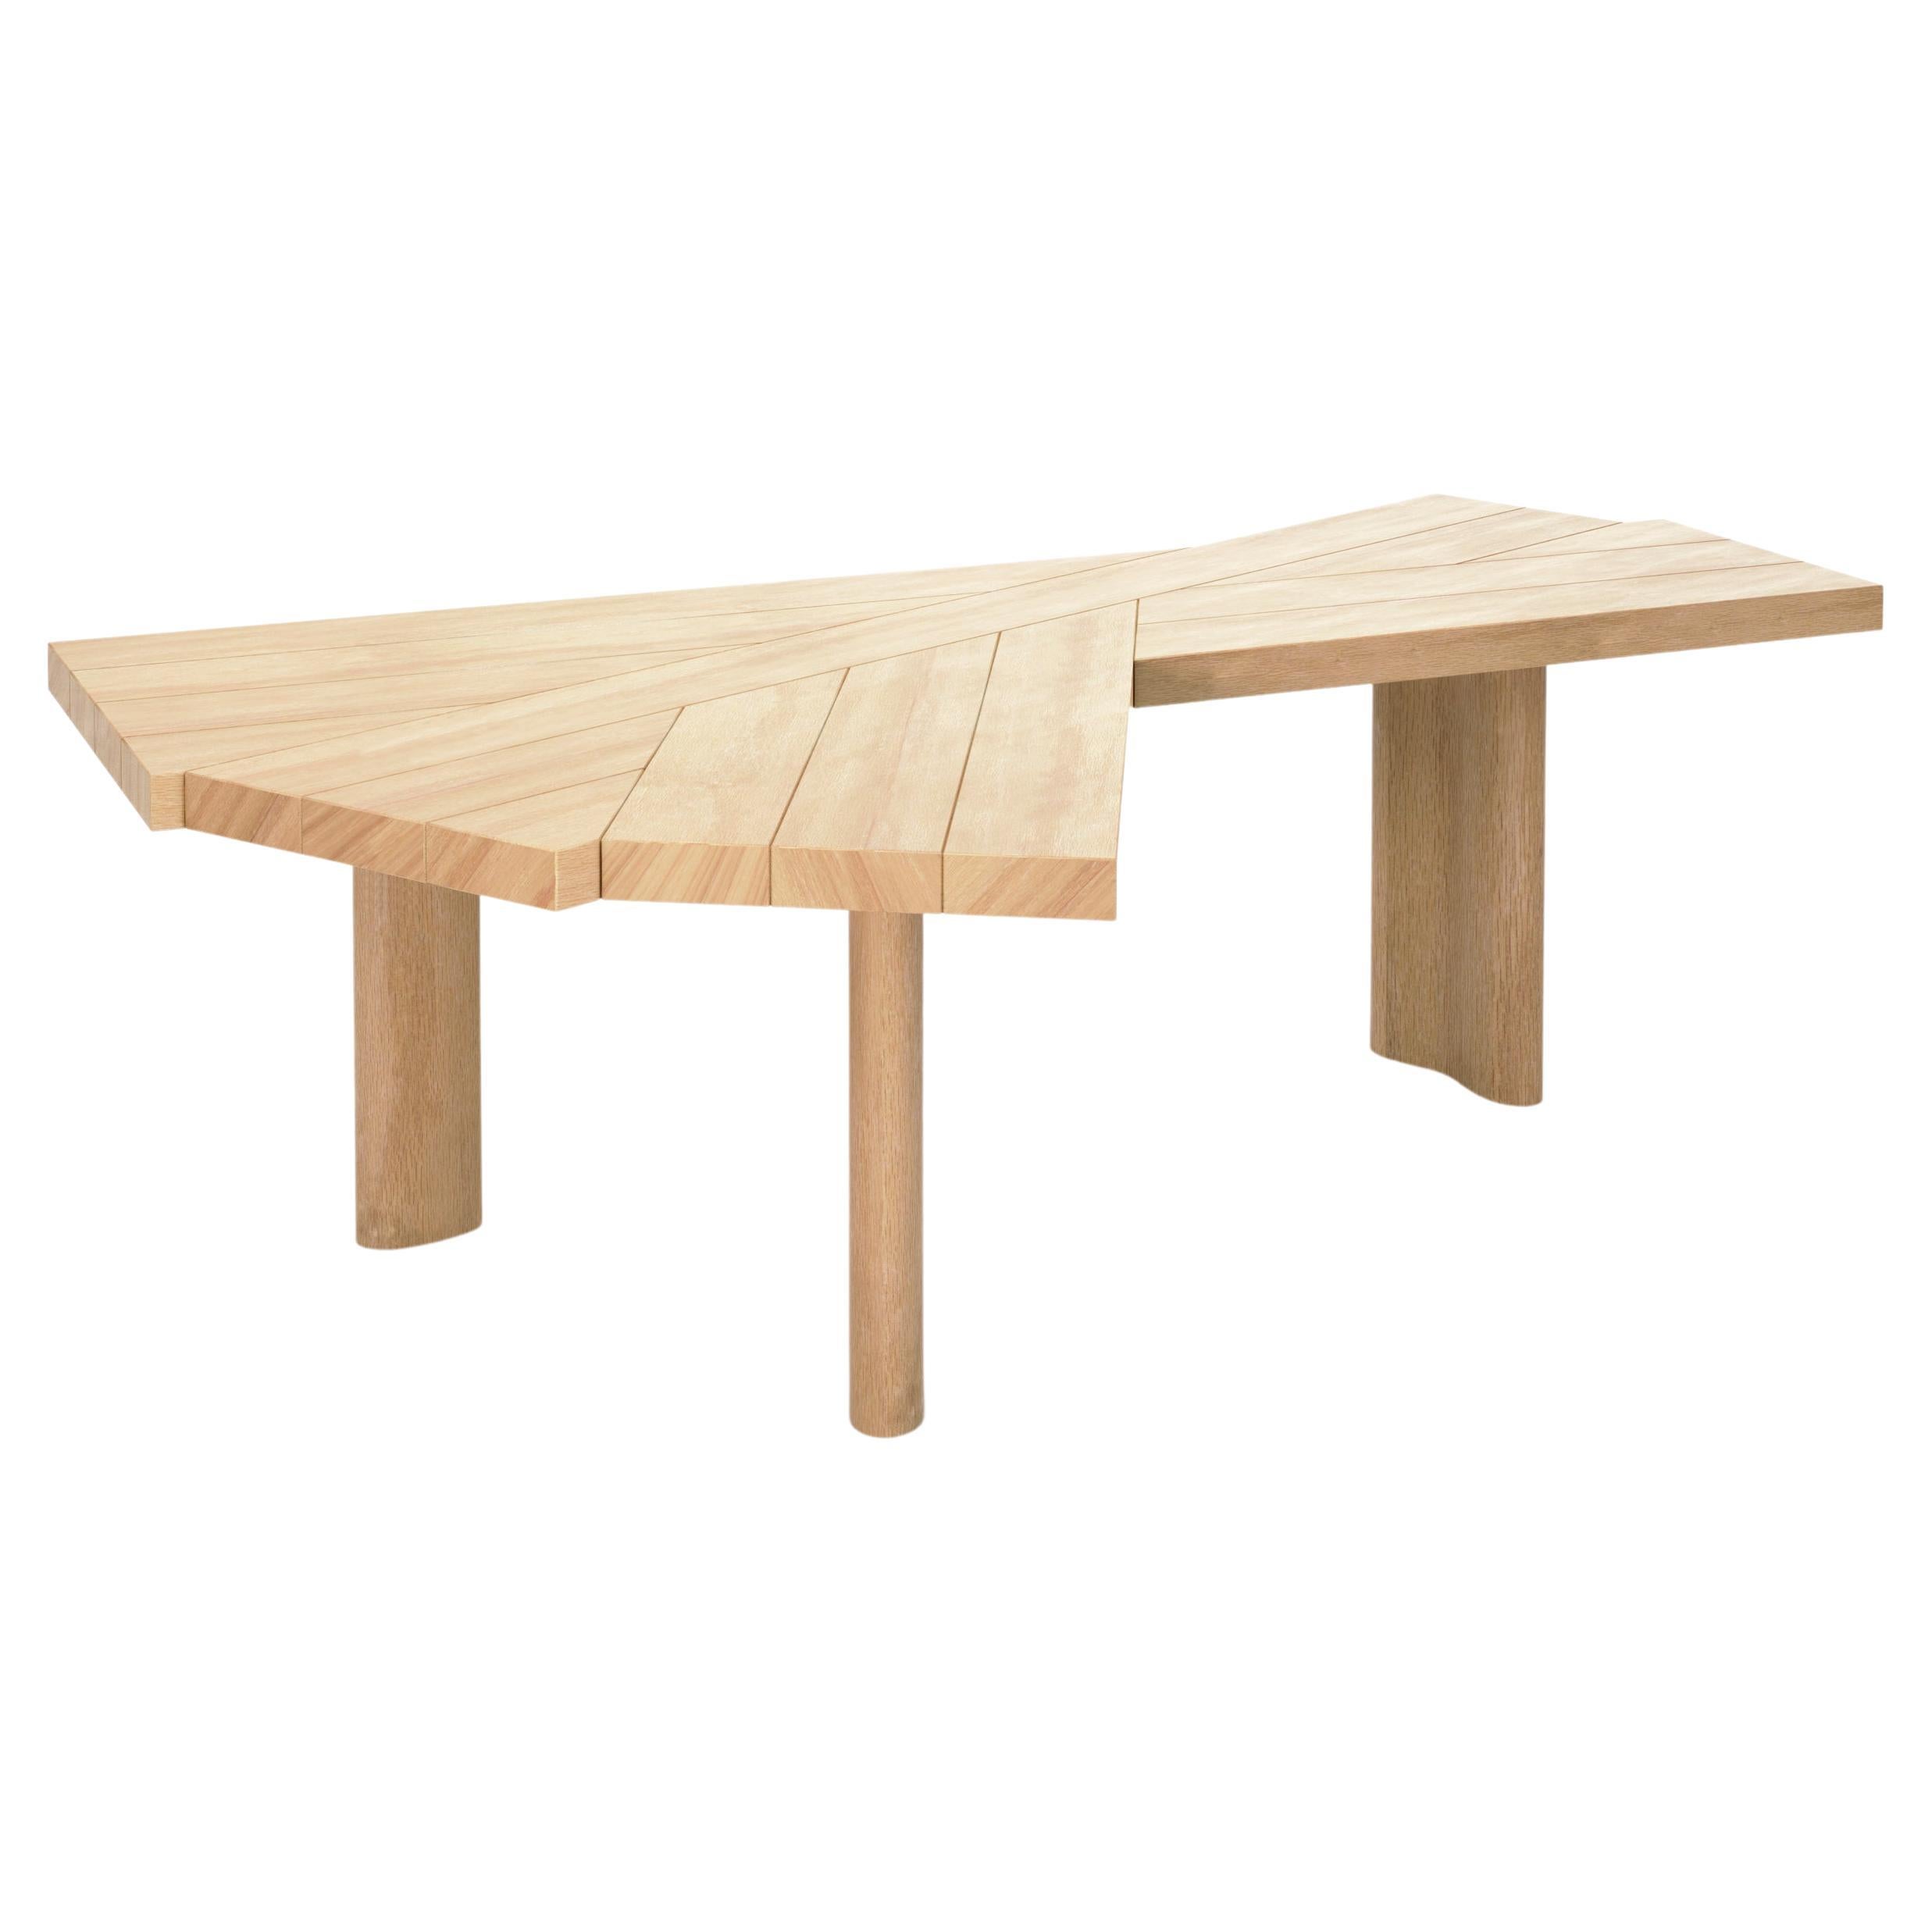 Charlotte Perriand Ventaglio Wood Table by Cassina